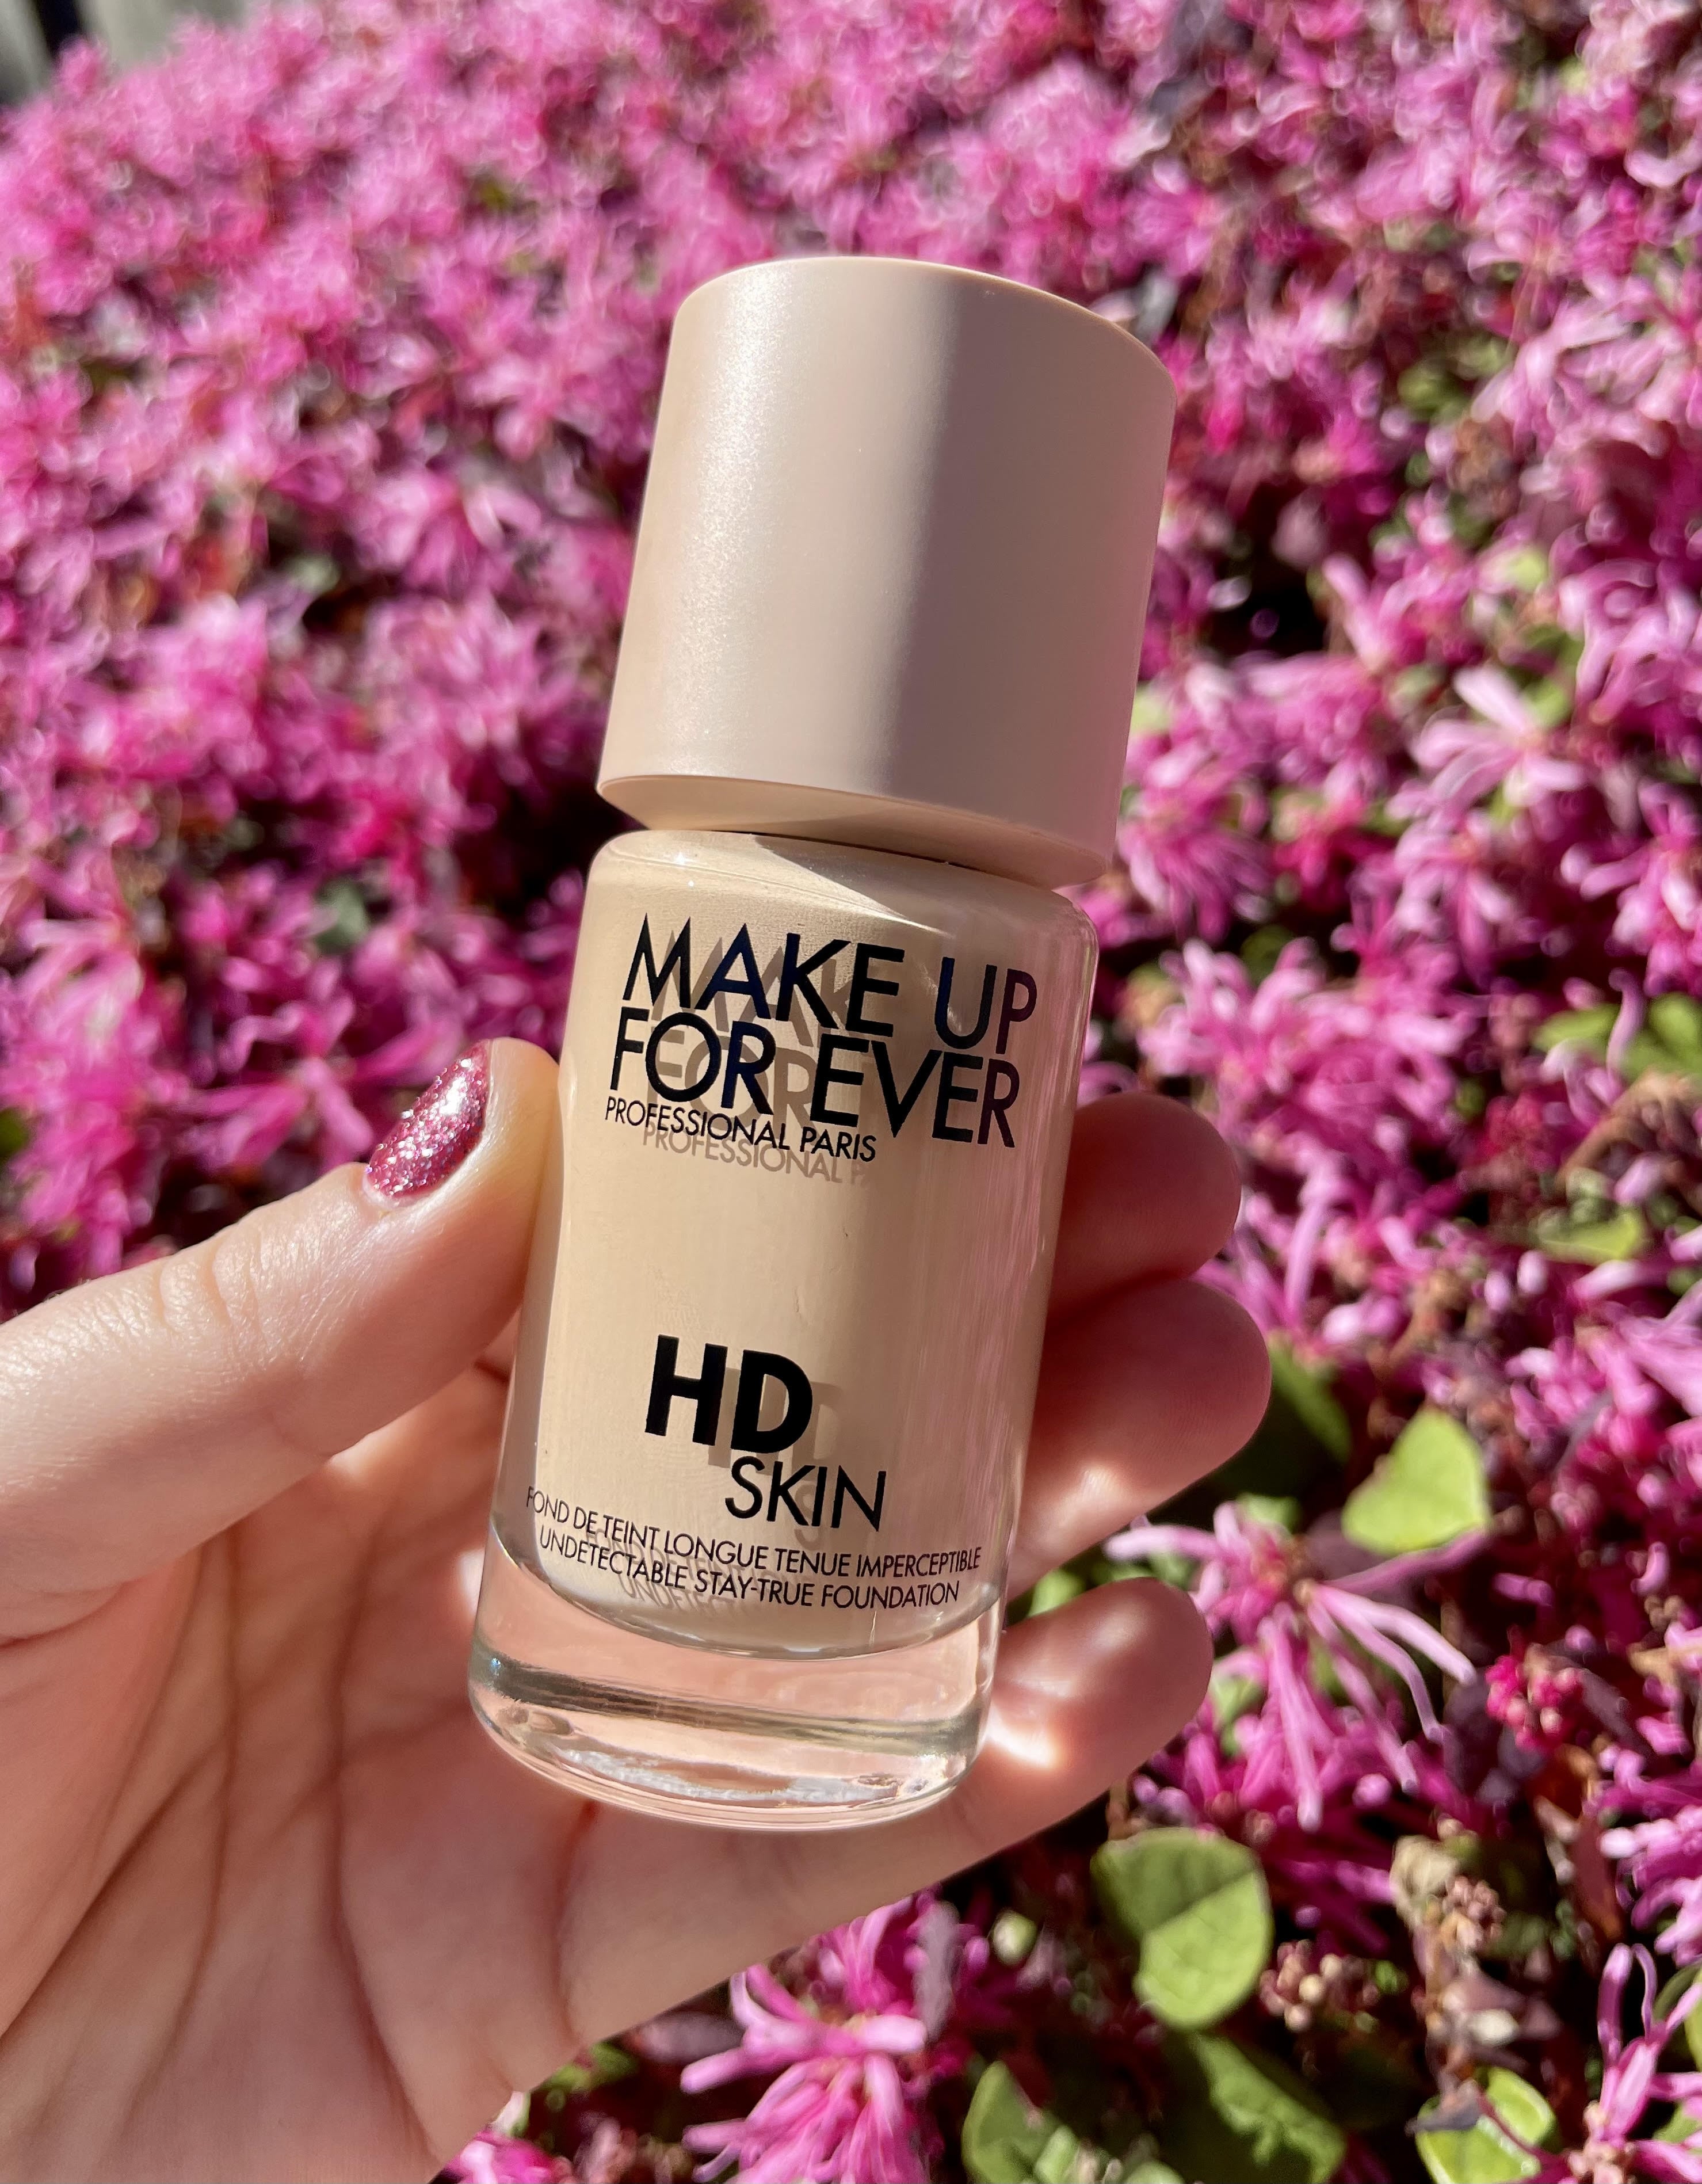 4 Editors Review New Make Up For Ever HD Skin Foundation